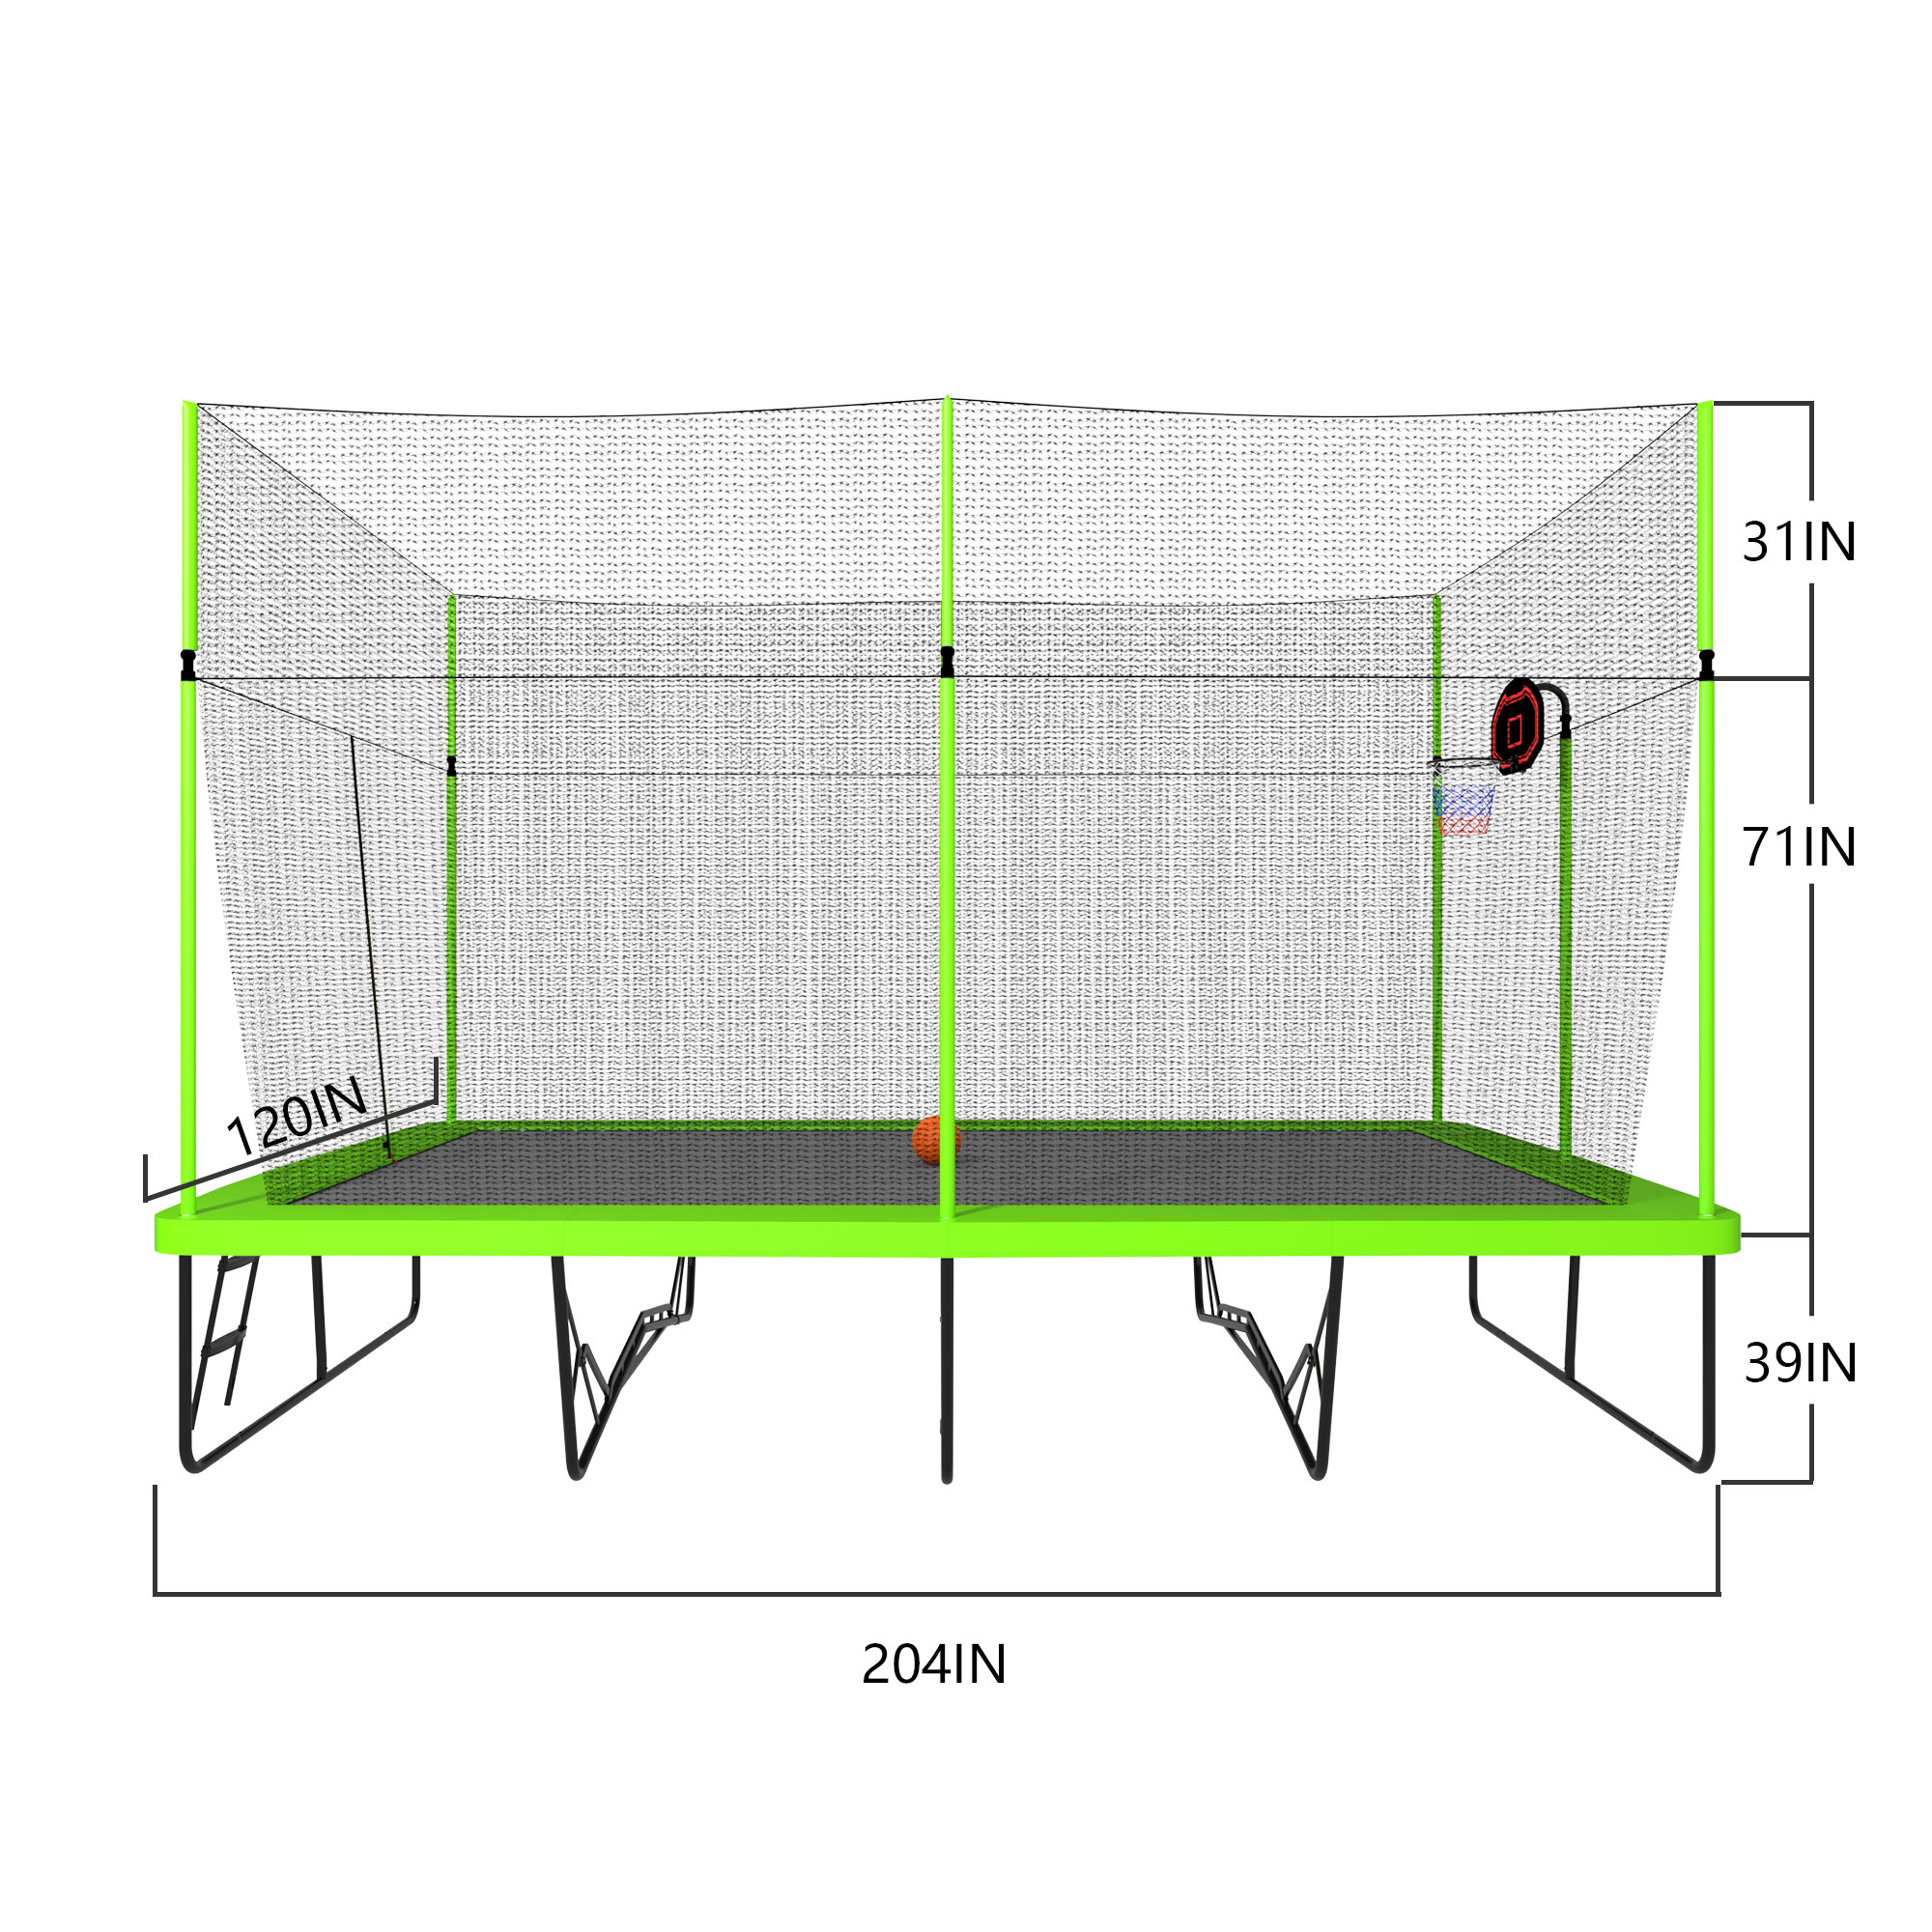 Dcenta 10ft by 17ft Rectangule Trampoline with Green Fabric Black Powder-coated Galvanized Steel Tubes with Basketball Hoop System Ladder - image 4 of 7